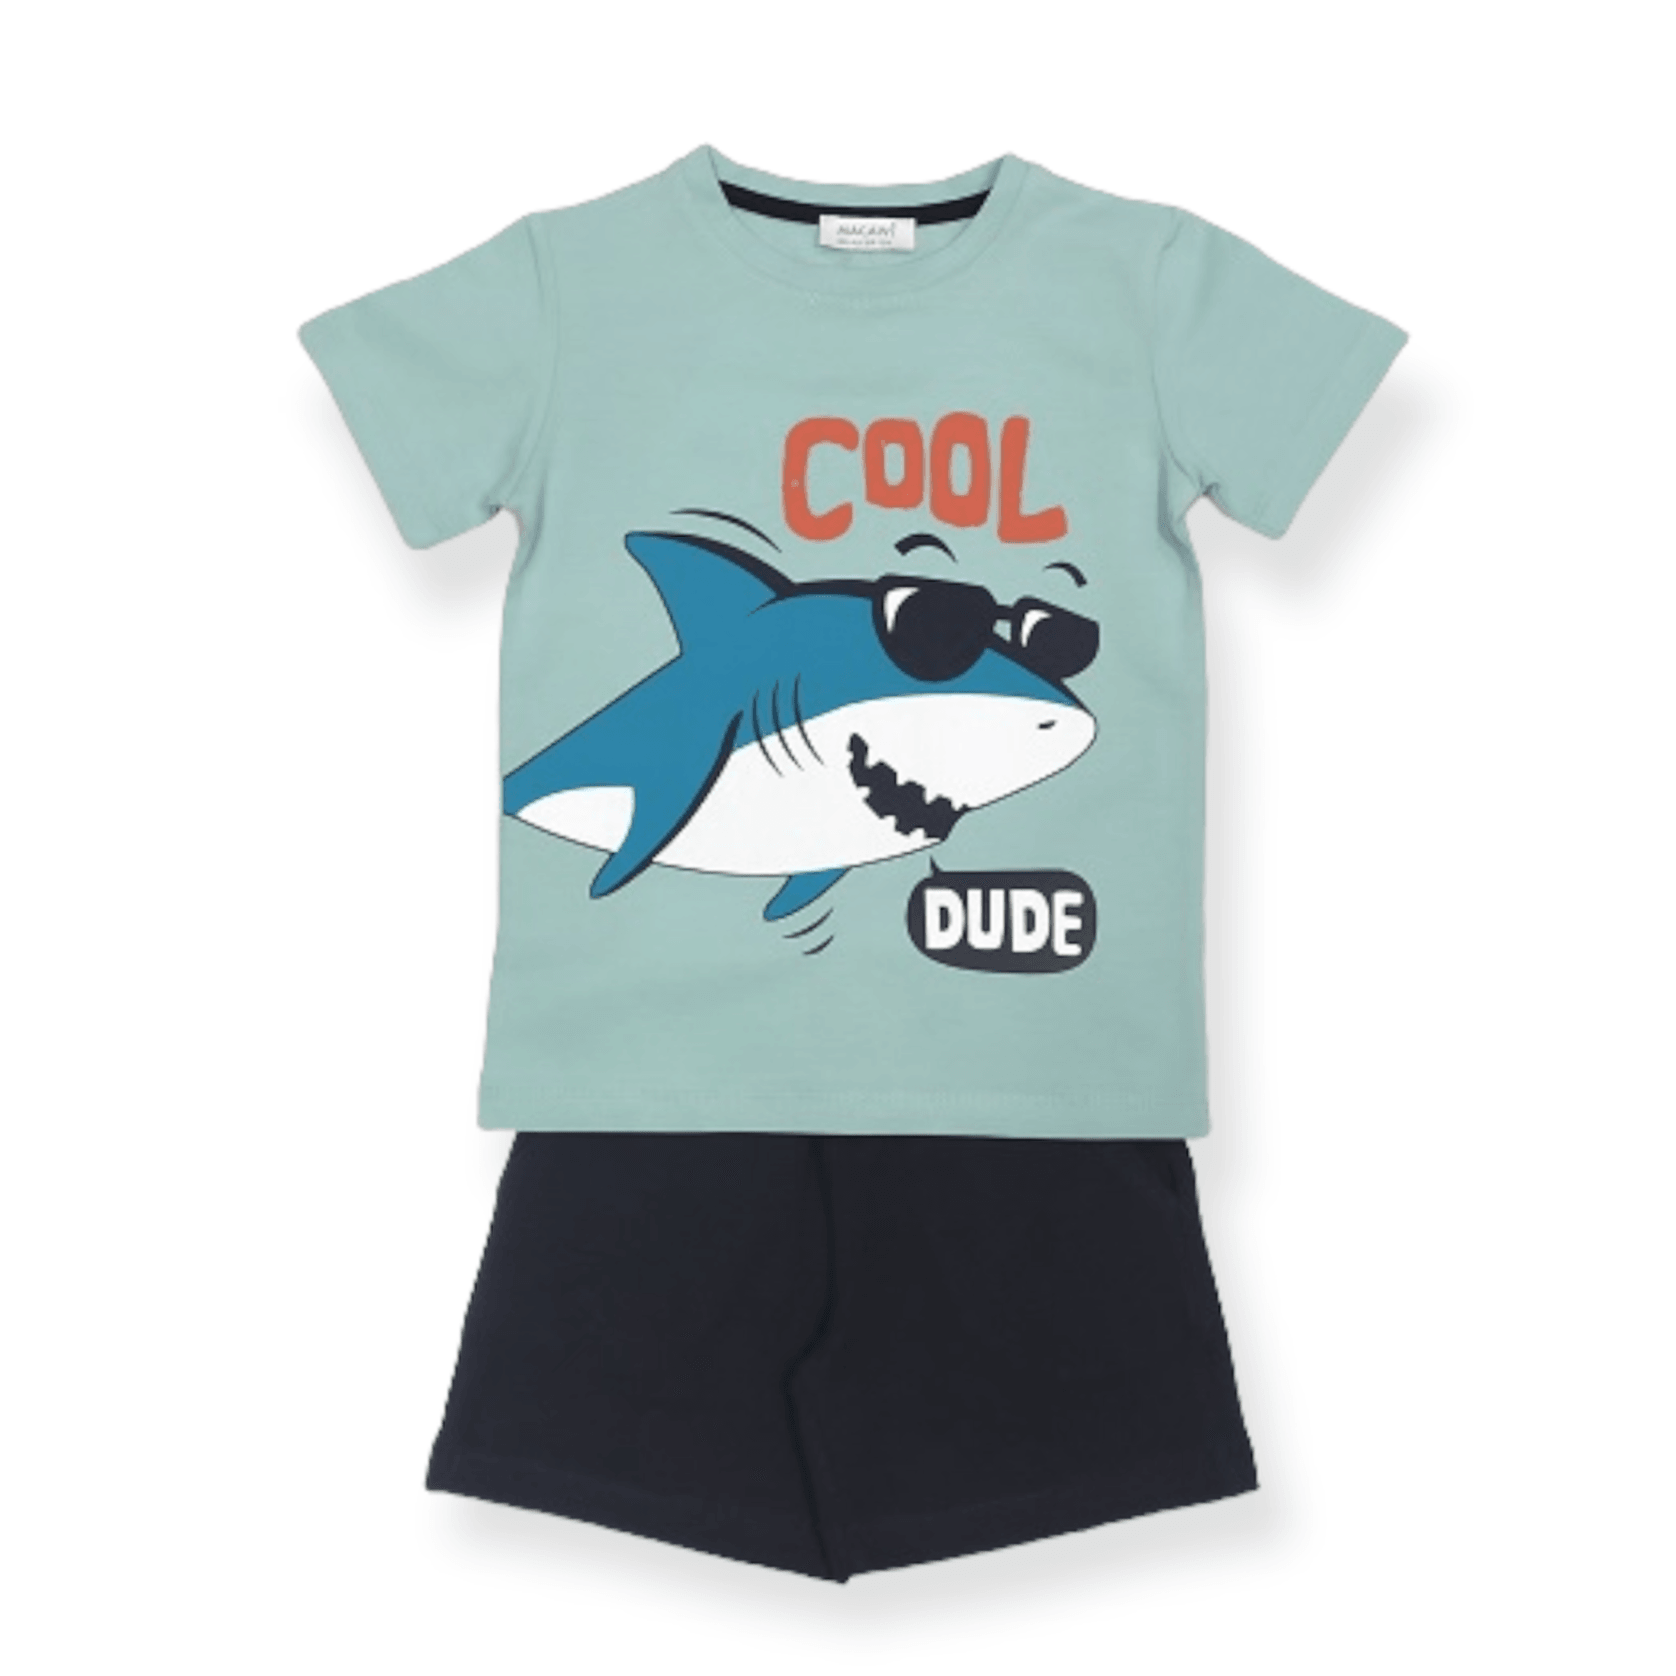 Cool Dude Shark Set - Cool Dude Shark Set - 3-4 Years / Mint / Cotton - Macawi - Melymod